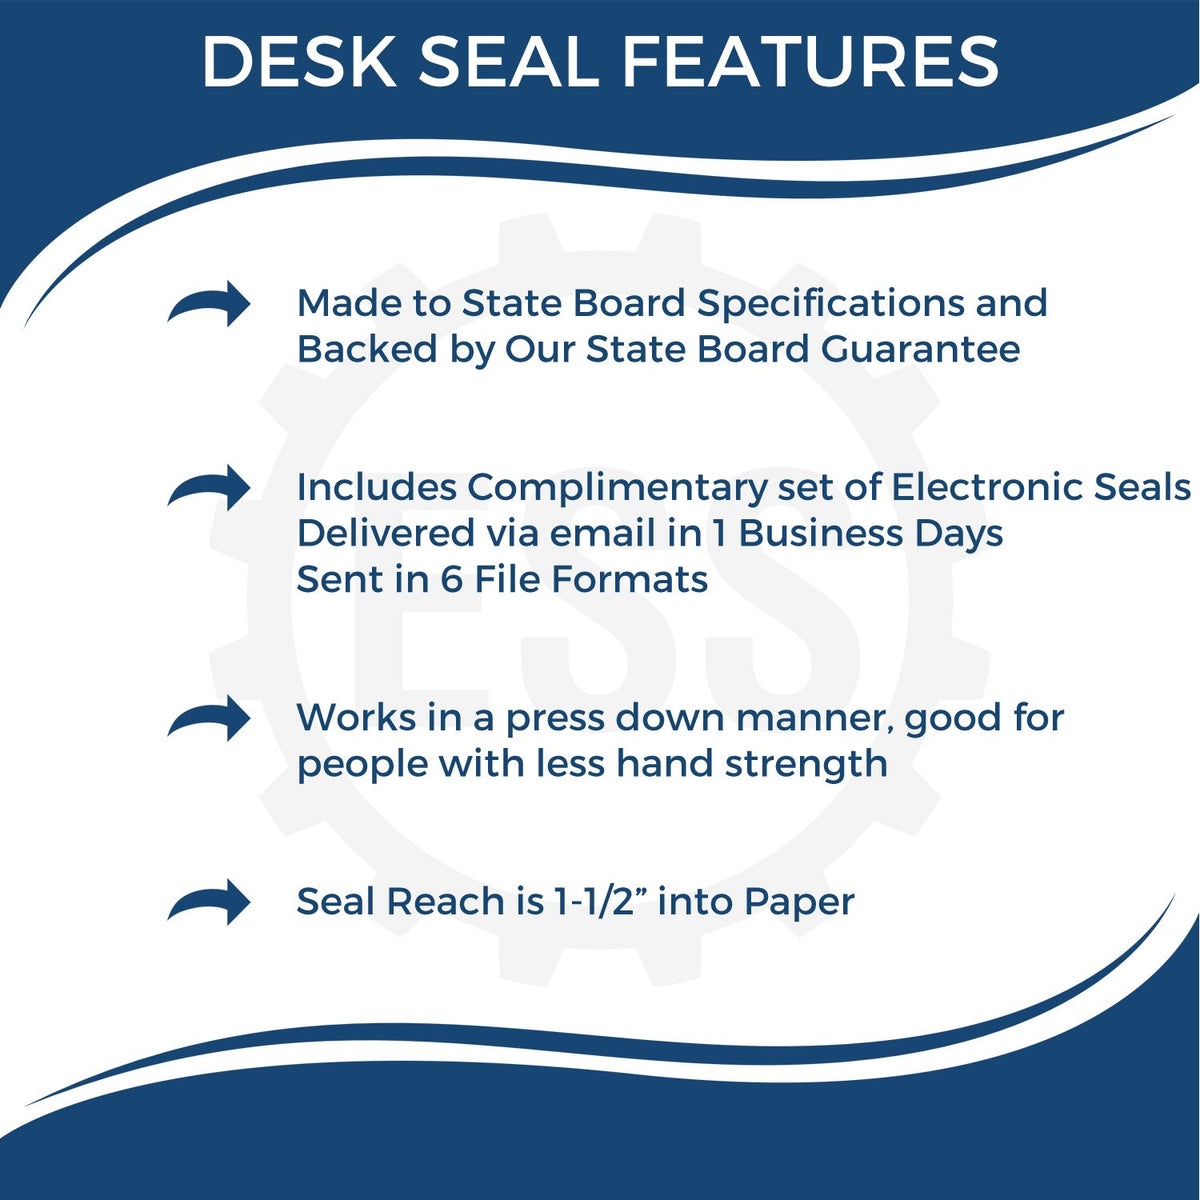 A picture of an infographic highlighting the selling points for the Wyoming Geologist Desk Seal